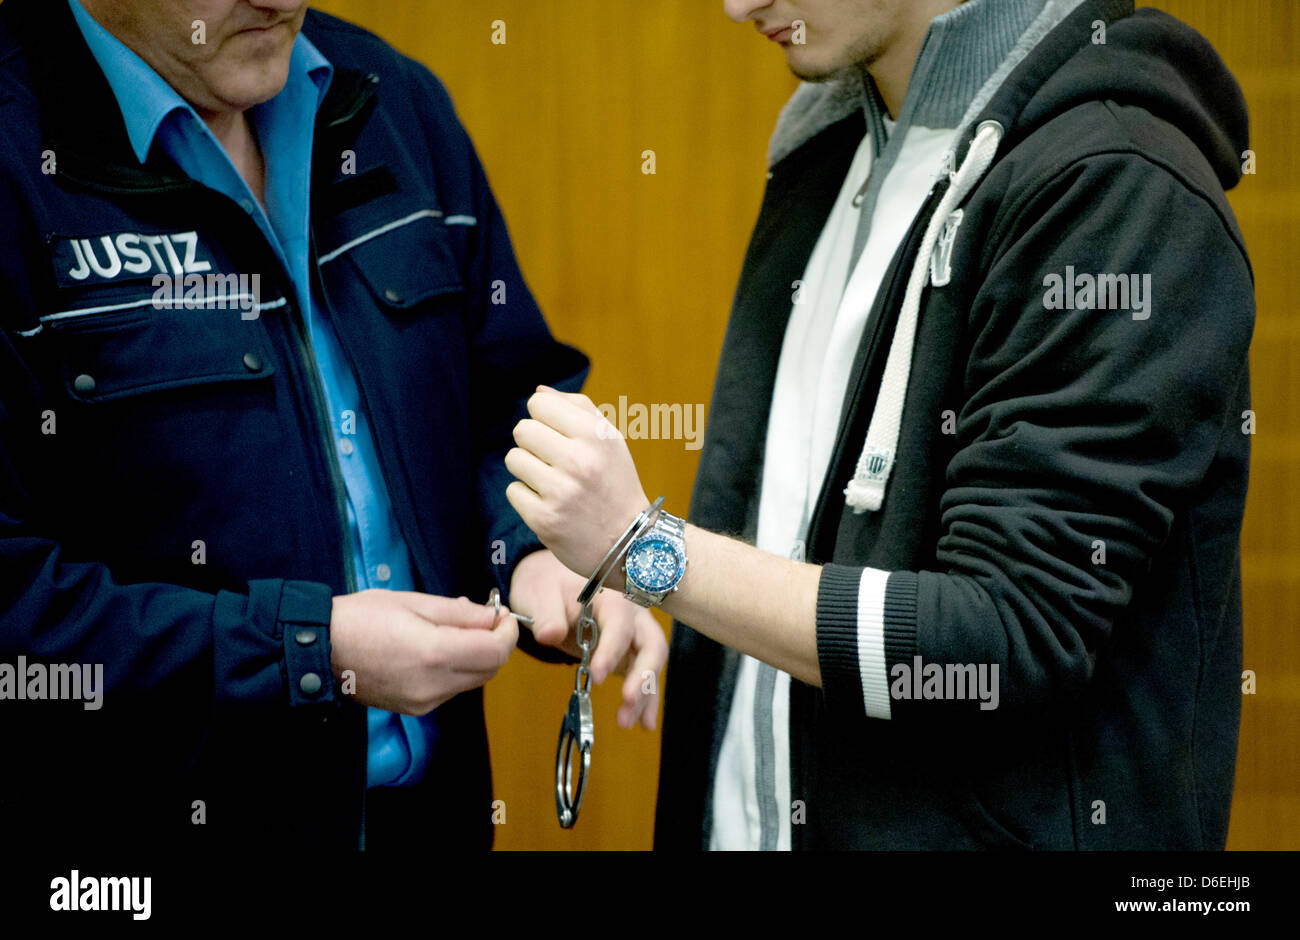 A judicial officer takes off the handcuffs of defendant Arid Uka (R) at the regional appeal court in Frankfurt Main, Germany, 02 February 2012. Uka is on trial for murder in two cases and attempted murder in further three. On 02 March 2011, he shot two US soldiers at the airport and injured two other soldiers severely in an assasination attempt. Photo: Arne Dedert Stock Photo